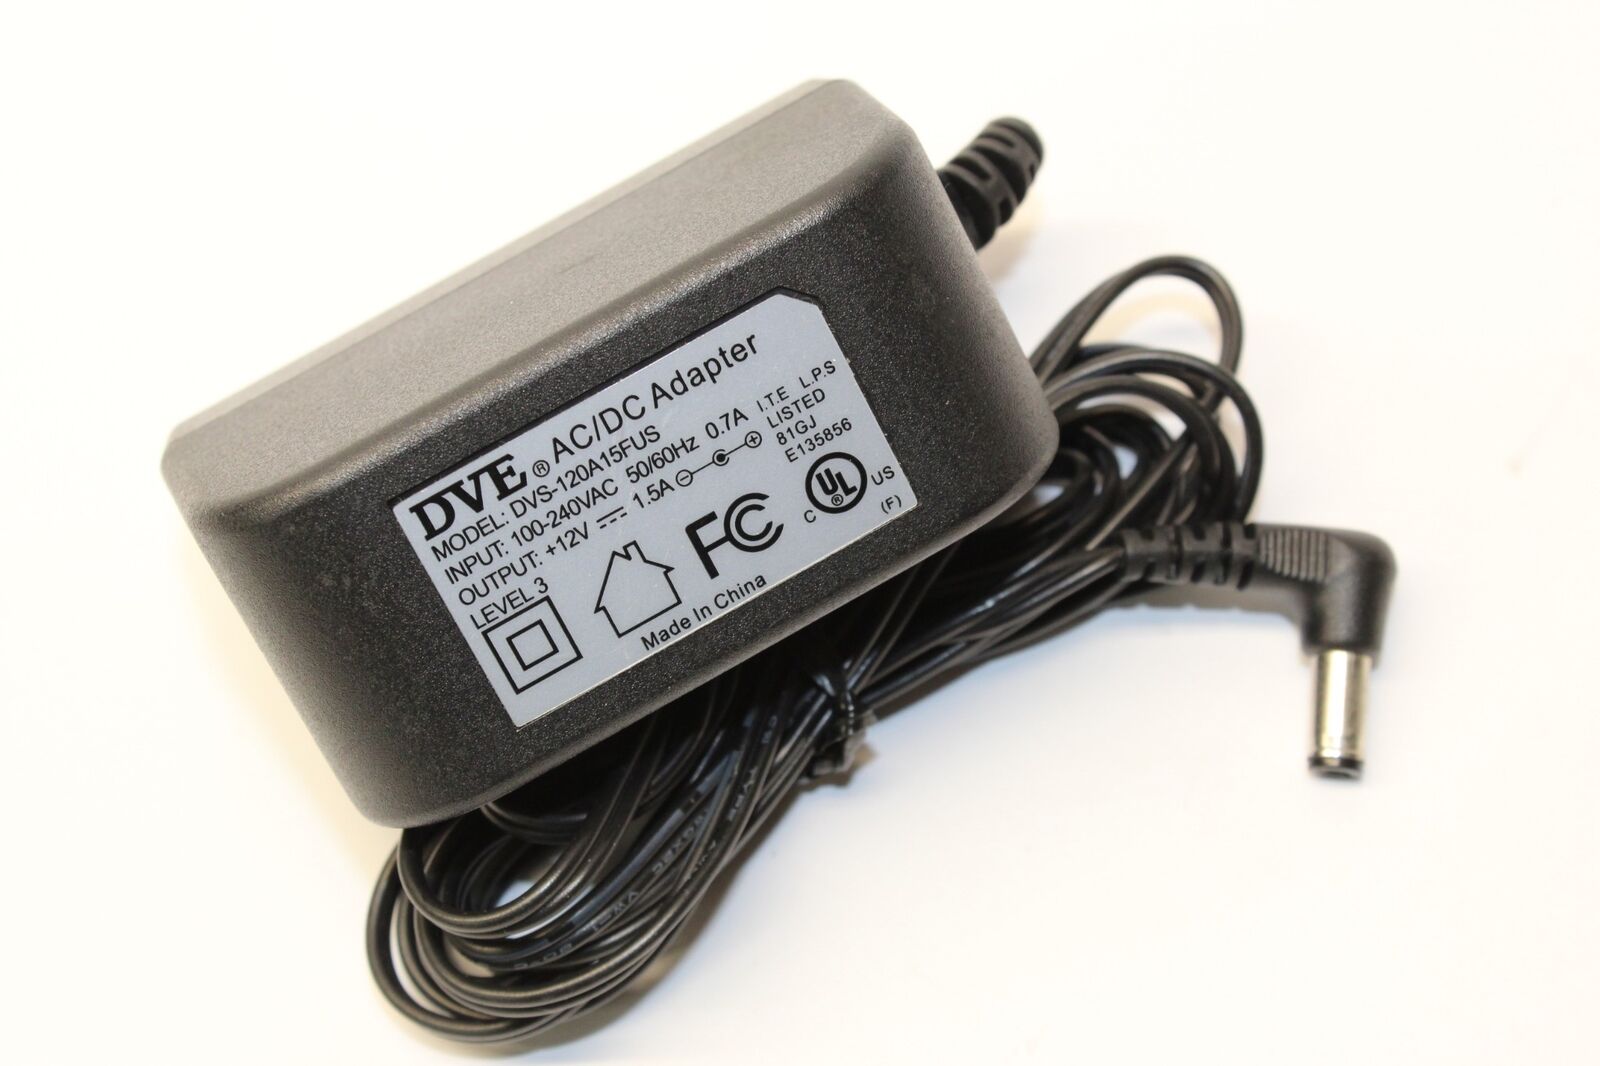 New 12V 1.5A DVE DVS-120A15FUS Power Supply Ac Adapter for Lorex Security Camera System